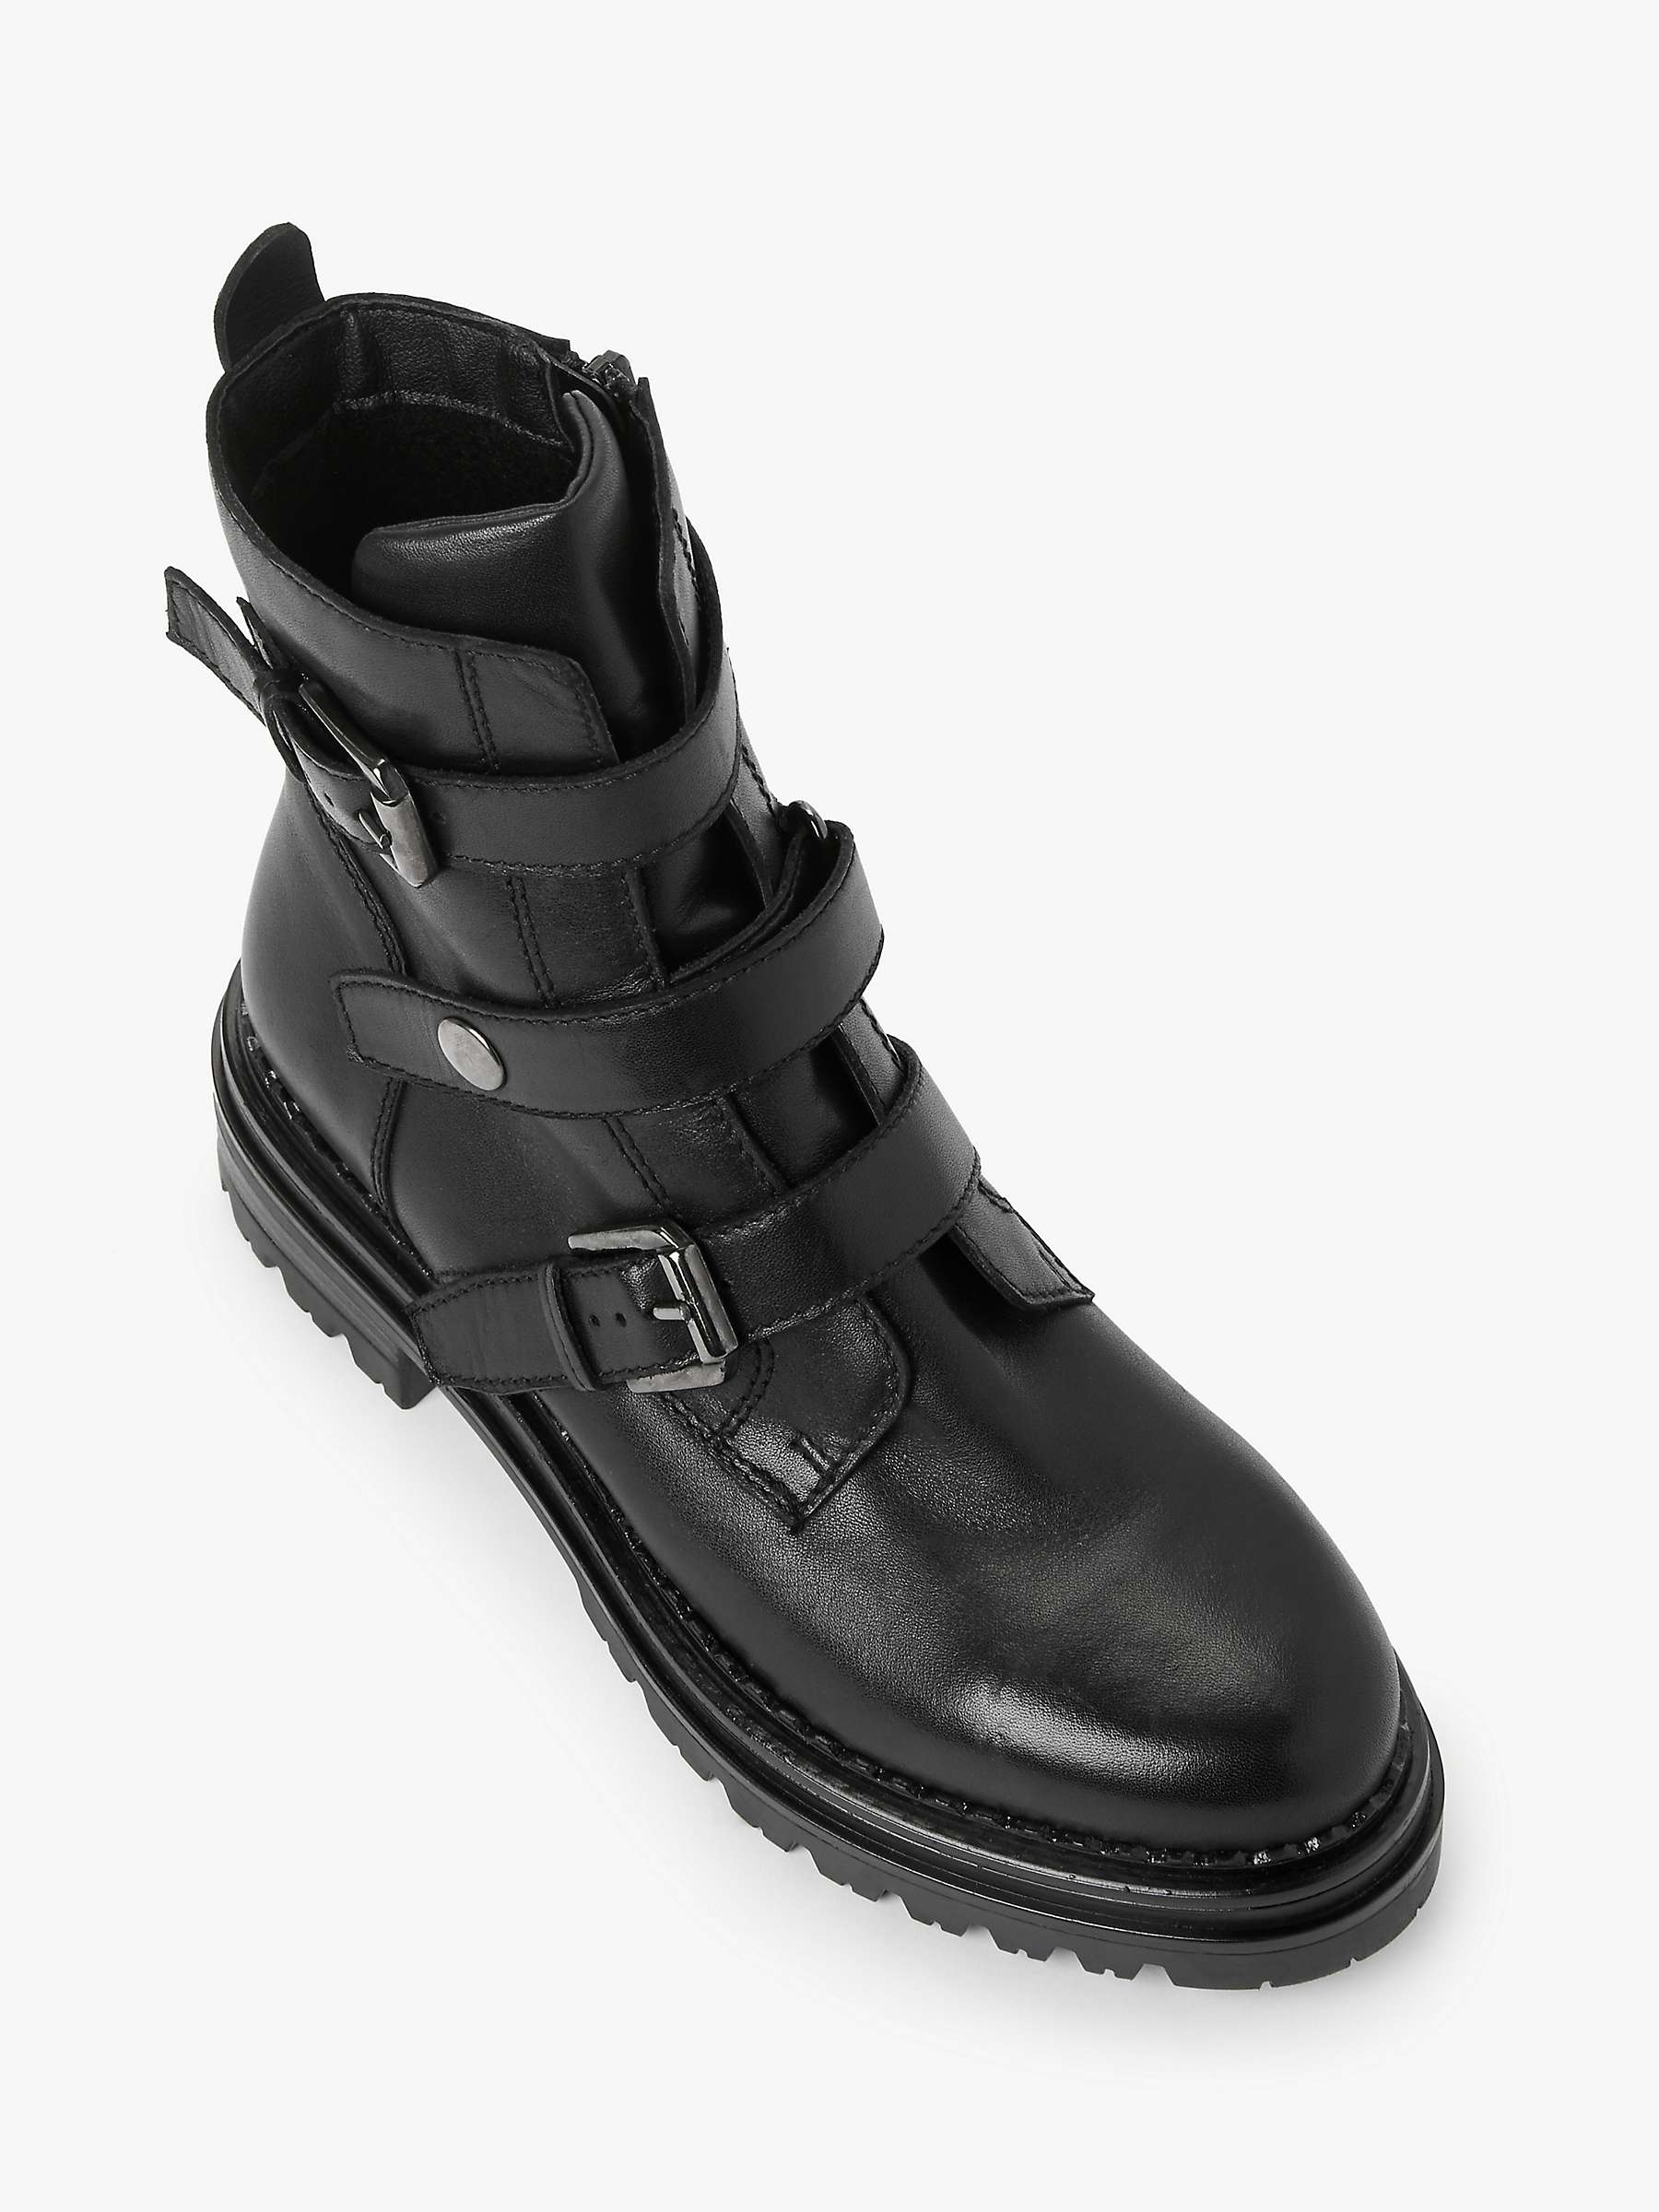 AND/OR Quinn Leather Biker Boots, Black at John Lewis & Partners